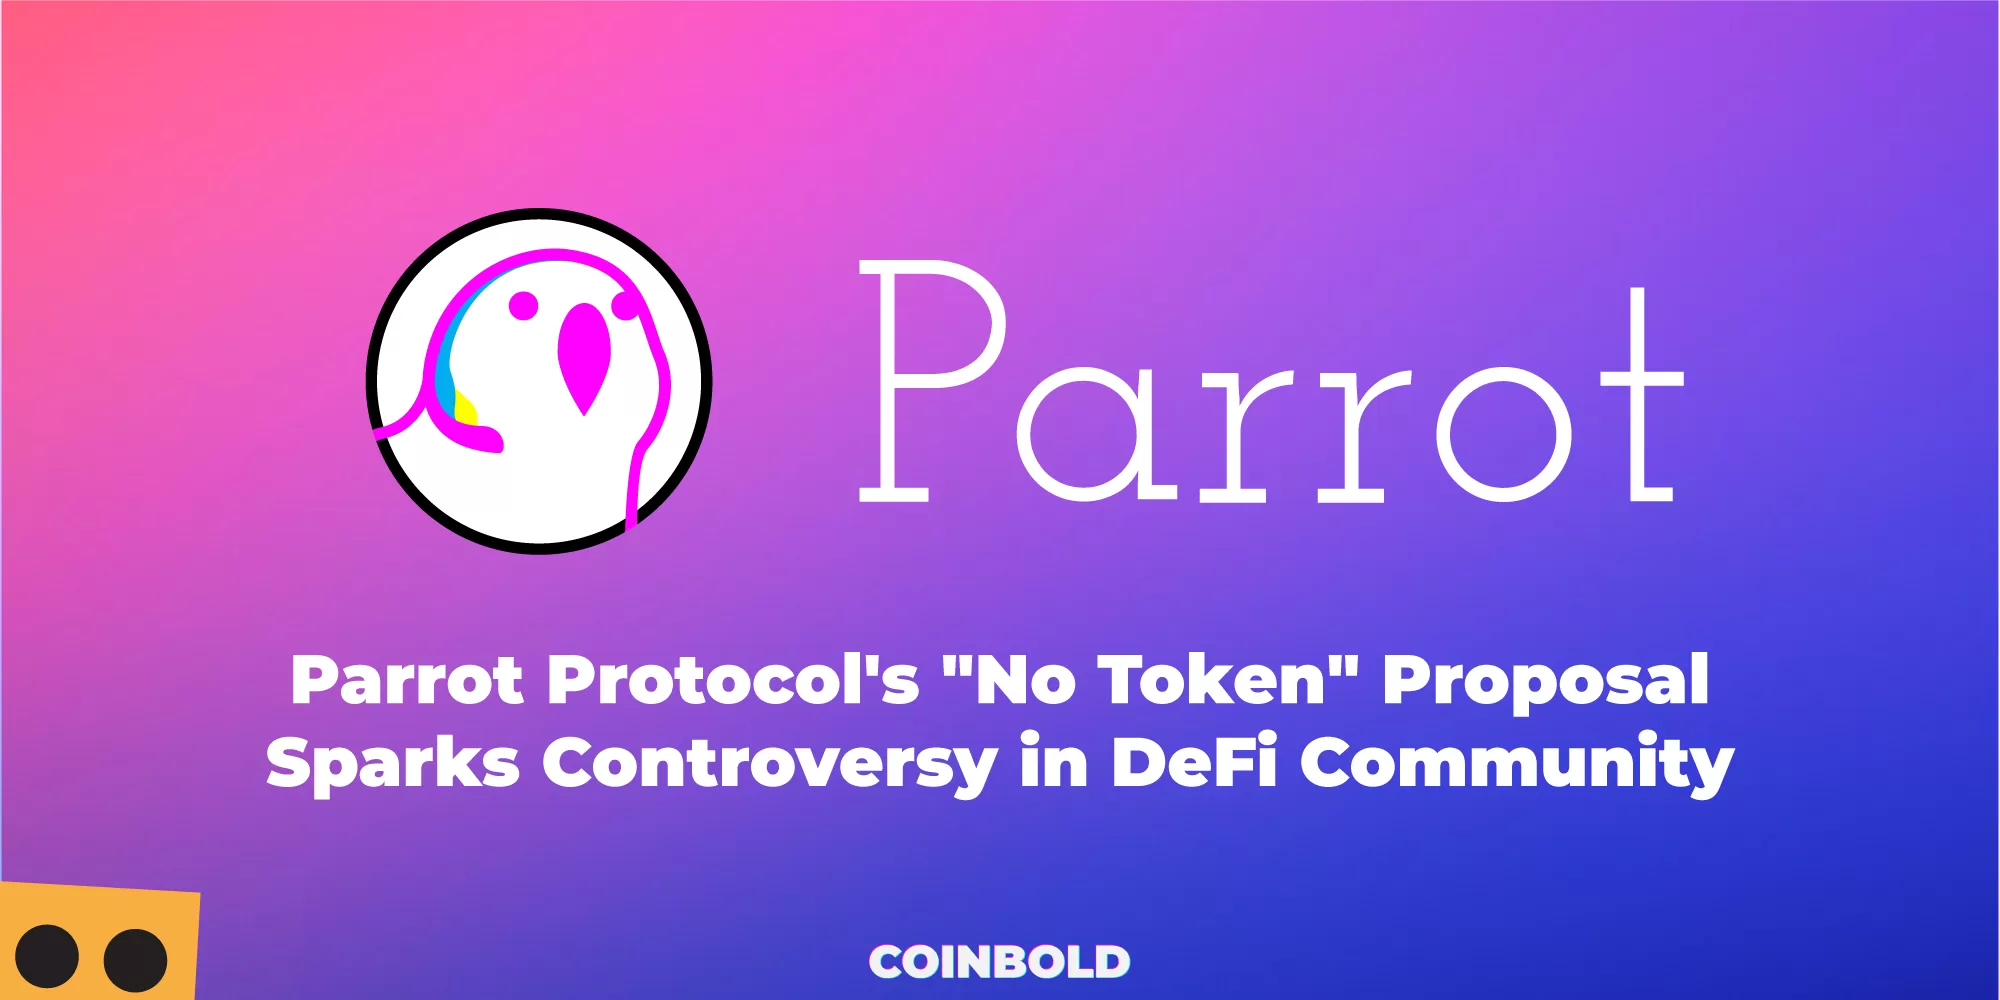 Parrot Protocol's "No Token" Proposal Sparks Controversy in DeFi Community